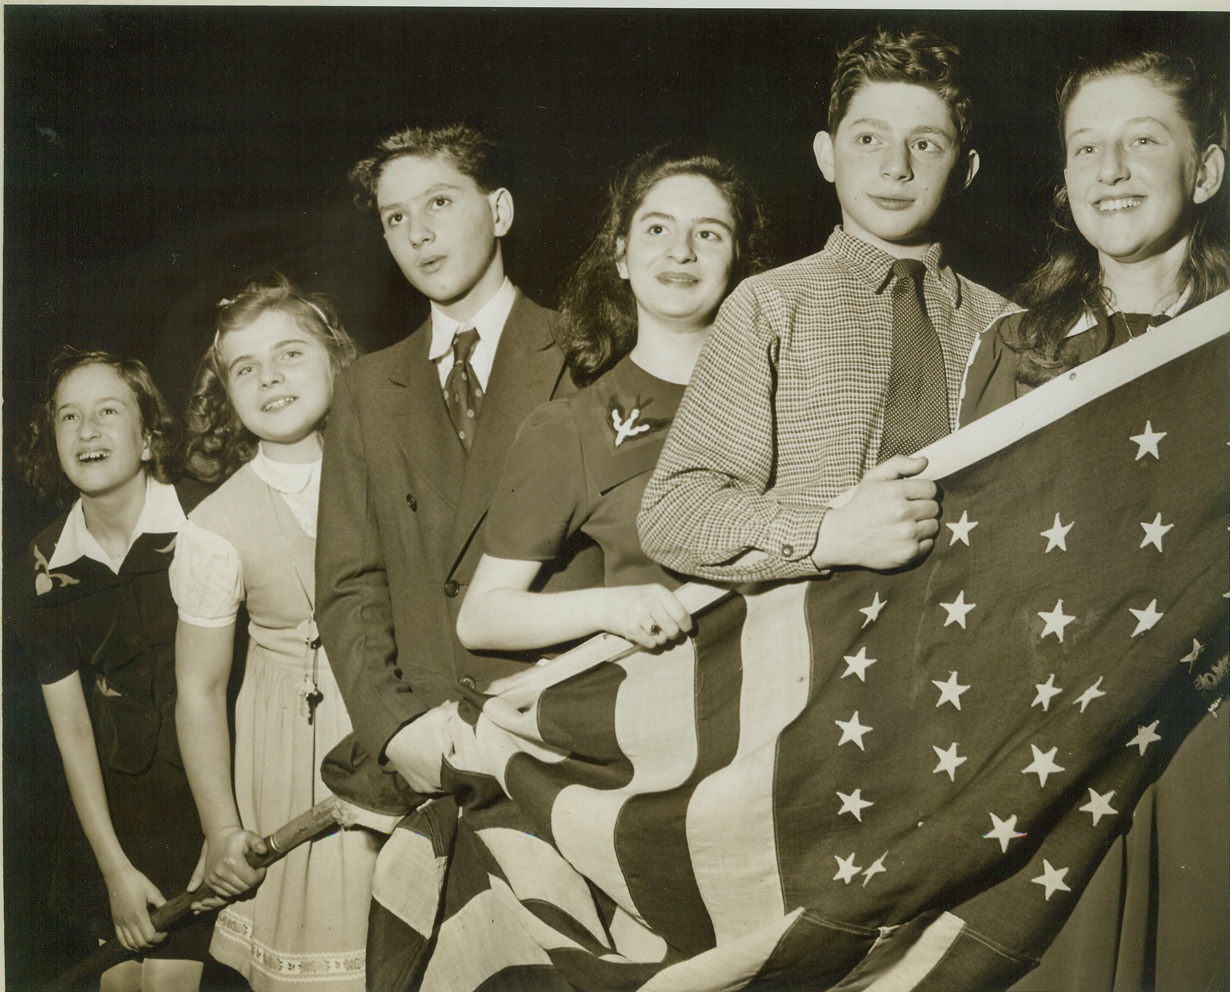 YOUNG JEWISH REFUGEE CHILDREN, 2/22/1943. NEW YORK CITY – A group of refugee children recently arrived in this country from Europe stand behind the American Flag at a Solemn Assembly of Prayer and Protest held today at the Mecca Temple by three thousand Jewish children from 518 religious schools in greater New York for the children in Nazi-occupied countries. Left to Right: Ingeborg Jacob, Germany; Ruth Friedberg, Poland; Abraham Brumberg, Poland; Helen Springer Germany; Manfred Kochen, Luxembourg; and Janine Putter, France. Credit: ACME;